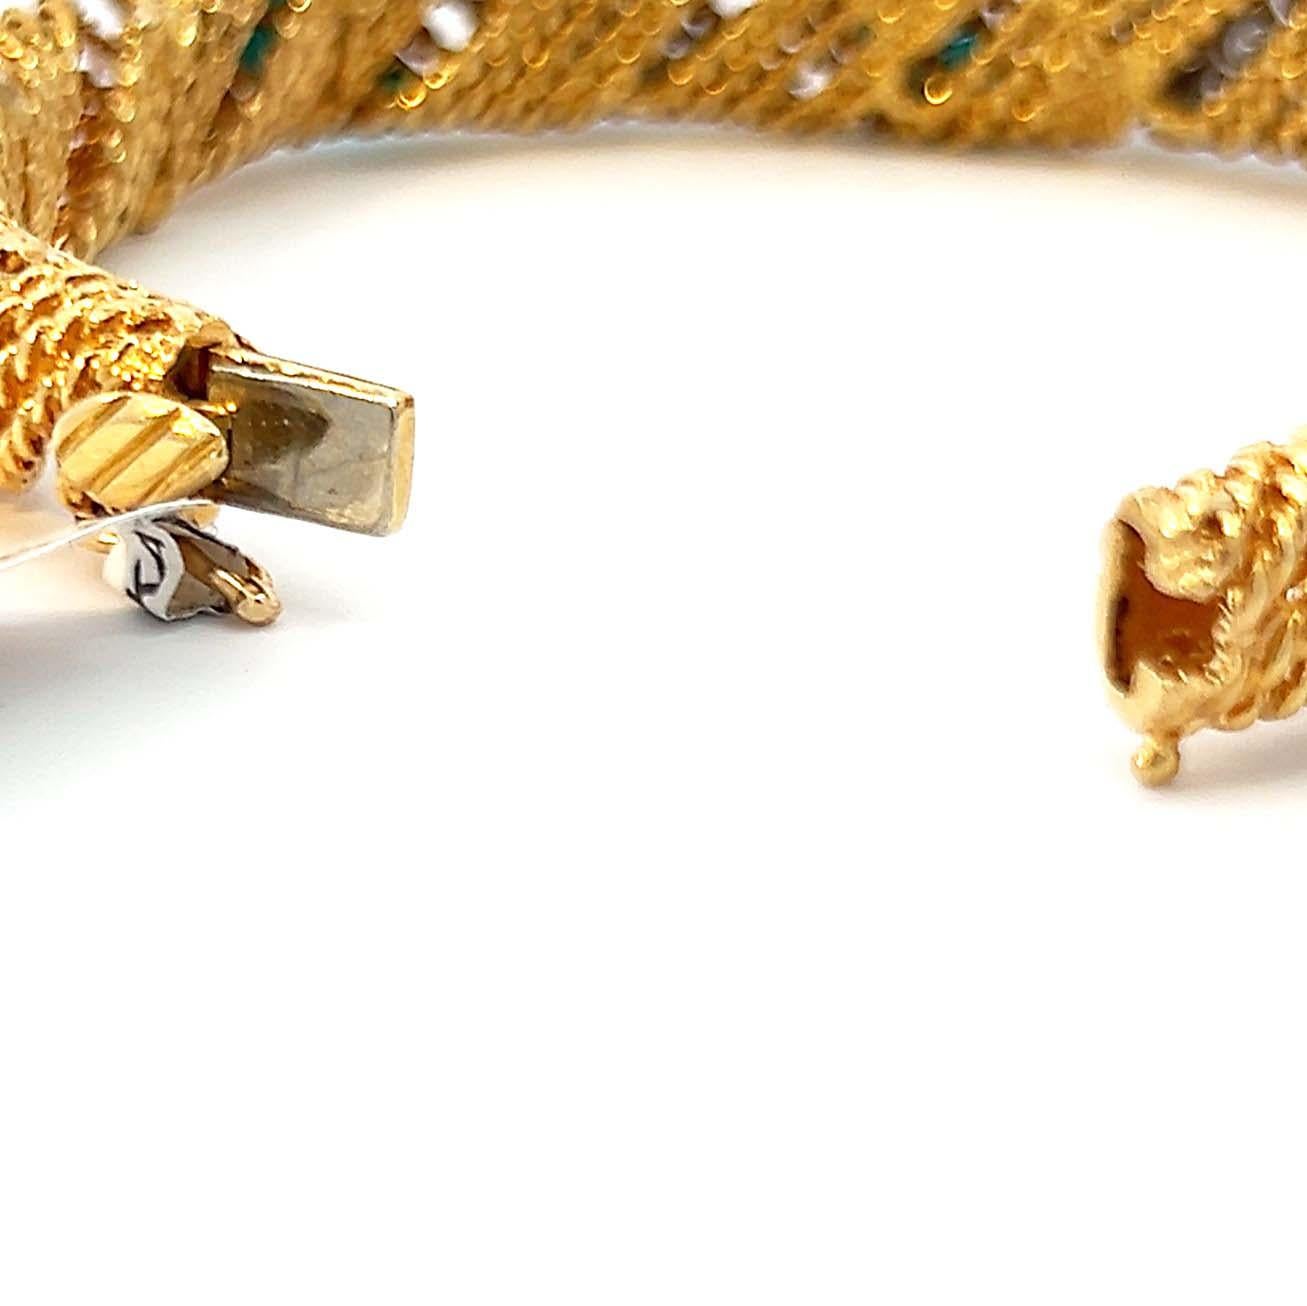 18-karat yellow gold vintage 1960s retro diamond and turquoise bracelet cuff. The twist/barber-pole design showcases diamonds and turquoise alternating on each link. Delicately set in the gold twists rows of bright white diamonds and cabochon